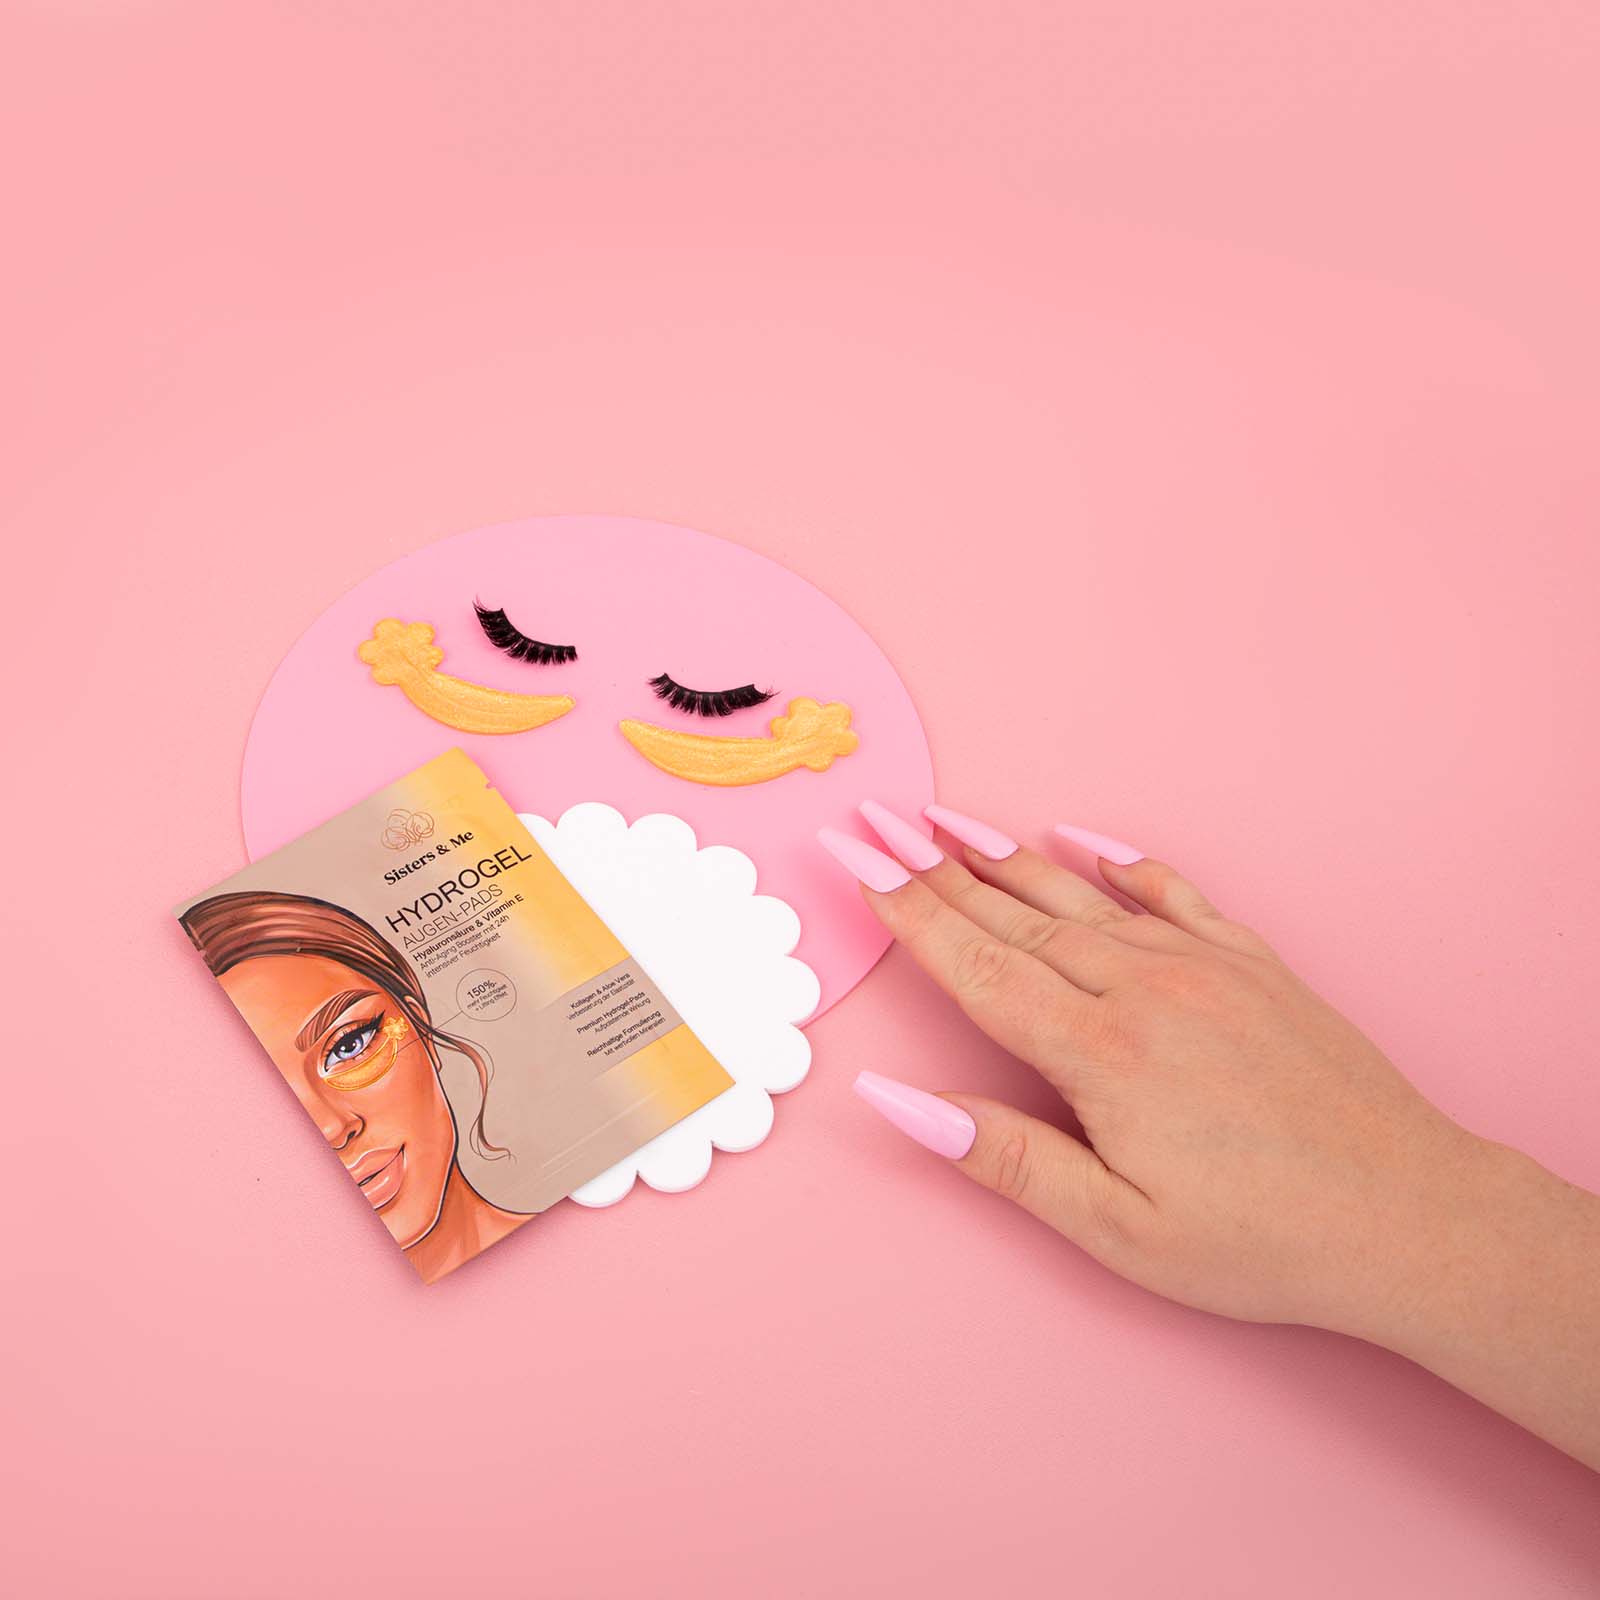 cute pink minimal product photos for face mask brand sisters and me. Styled product stills with a hand by colourpop studio